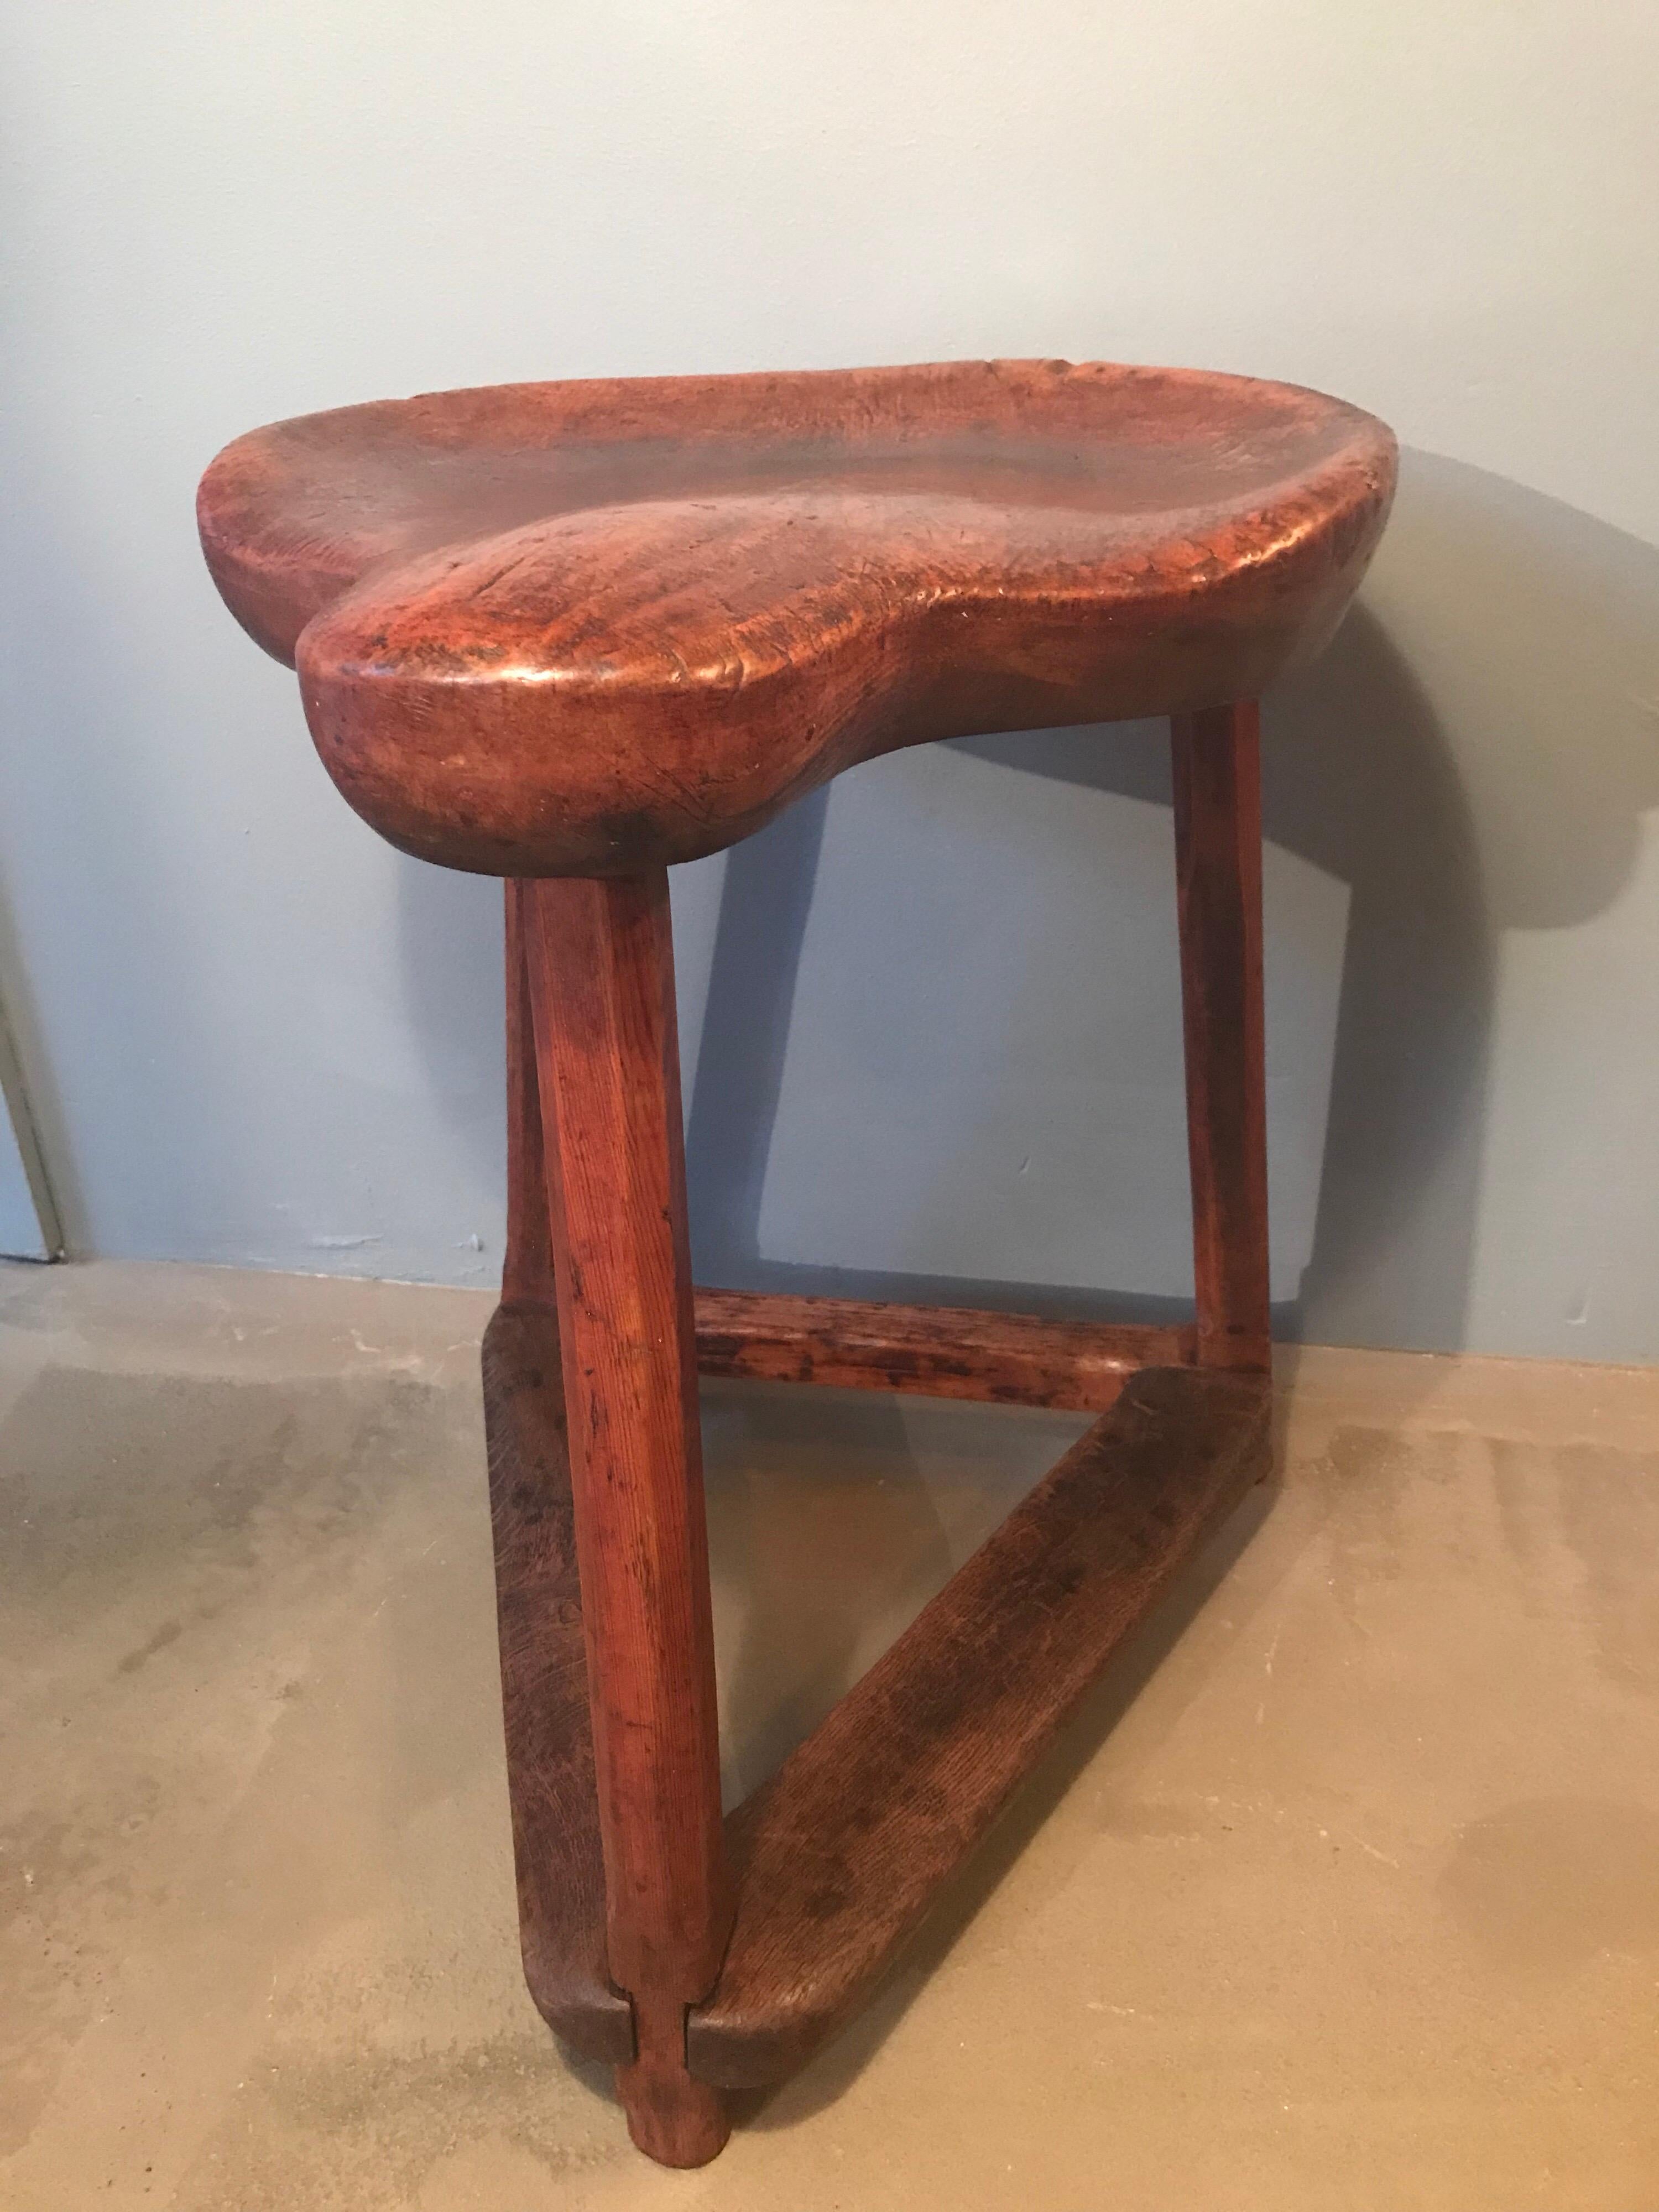 Hand-carved antique cobblers stool with the seat and legs made out of cherry wood and the foot rests made out of oak.
Great piece of vernacular furniture with lovely colour wear and patina to the wood.
Presumably from the 18th century.